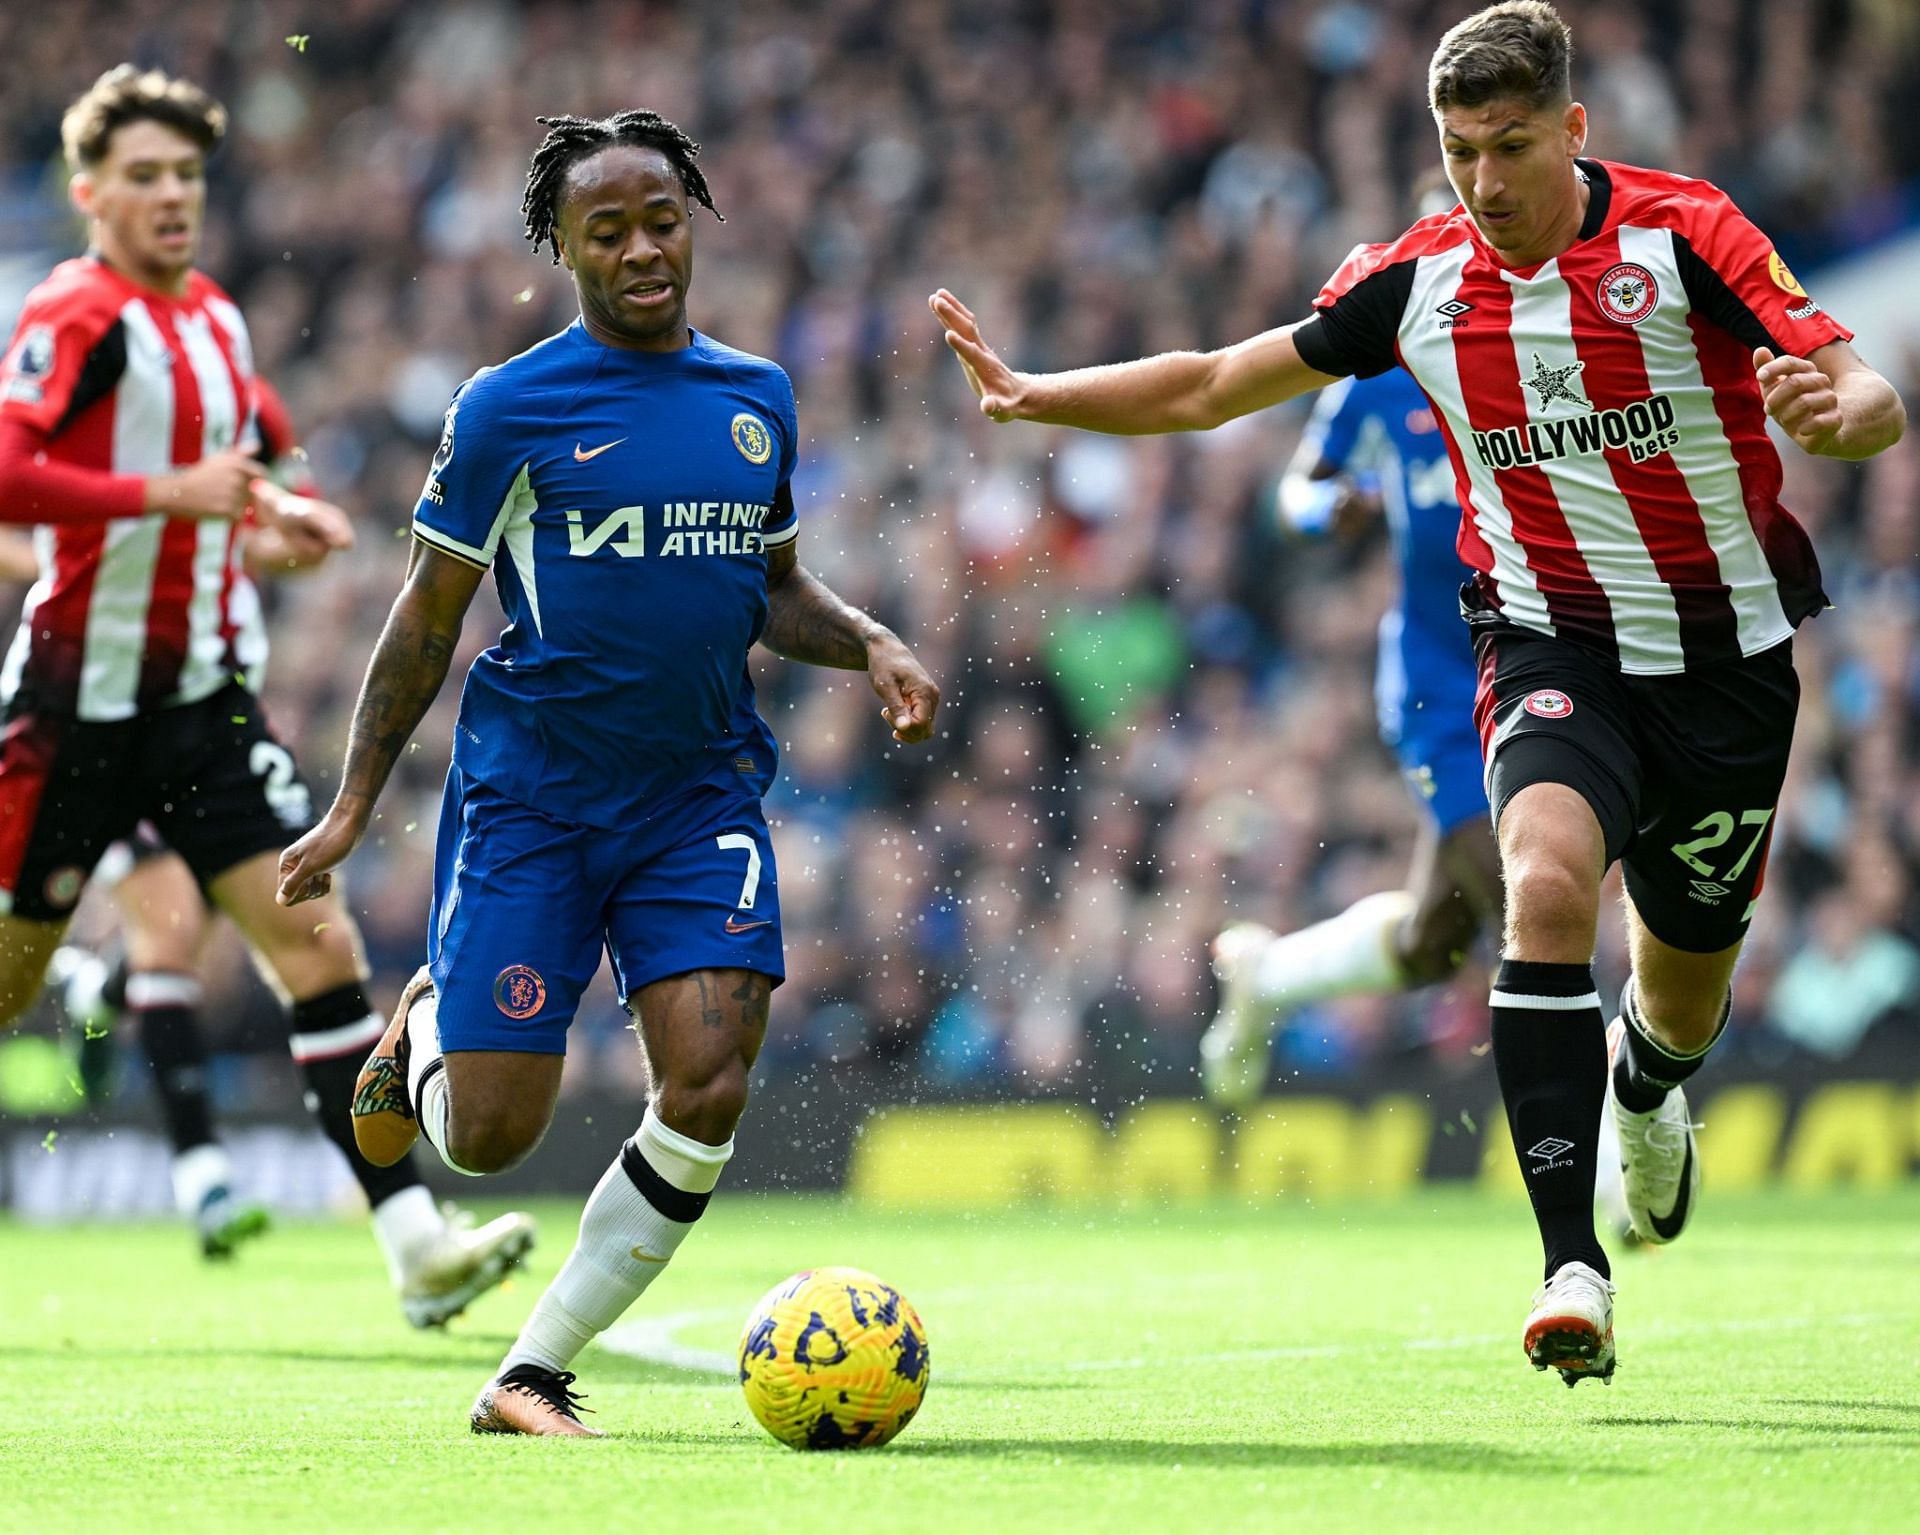 Chelsea suffered a 2-0 defeat to Brentford in the Premier League